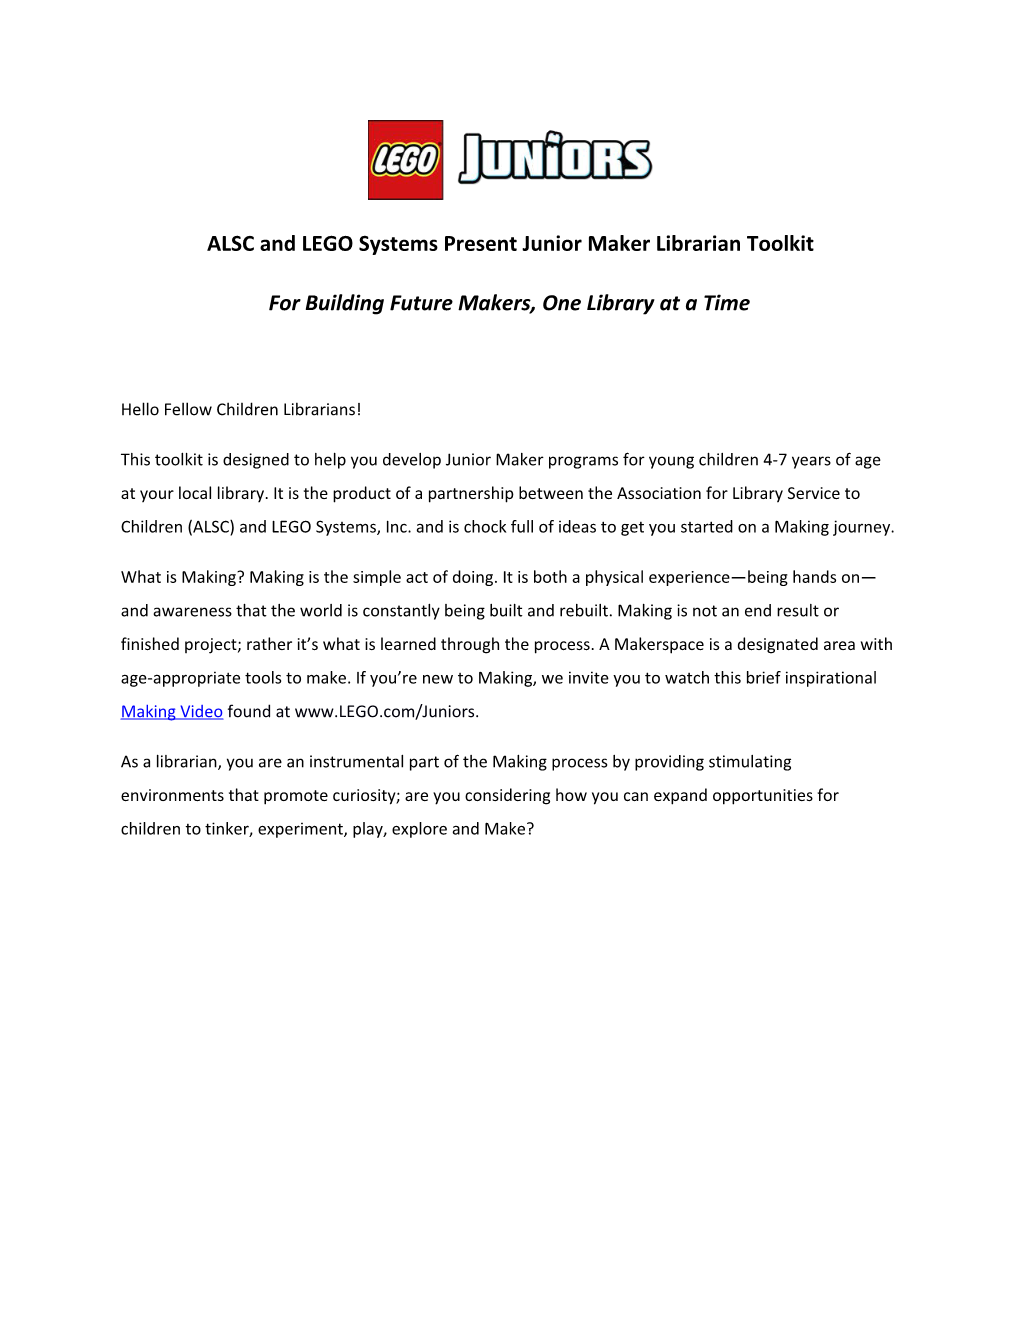 Alscand LEGO Systems Present Junior Maker Librarian Toolkit